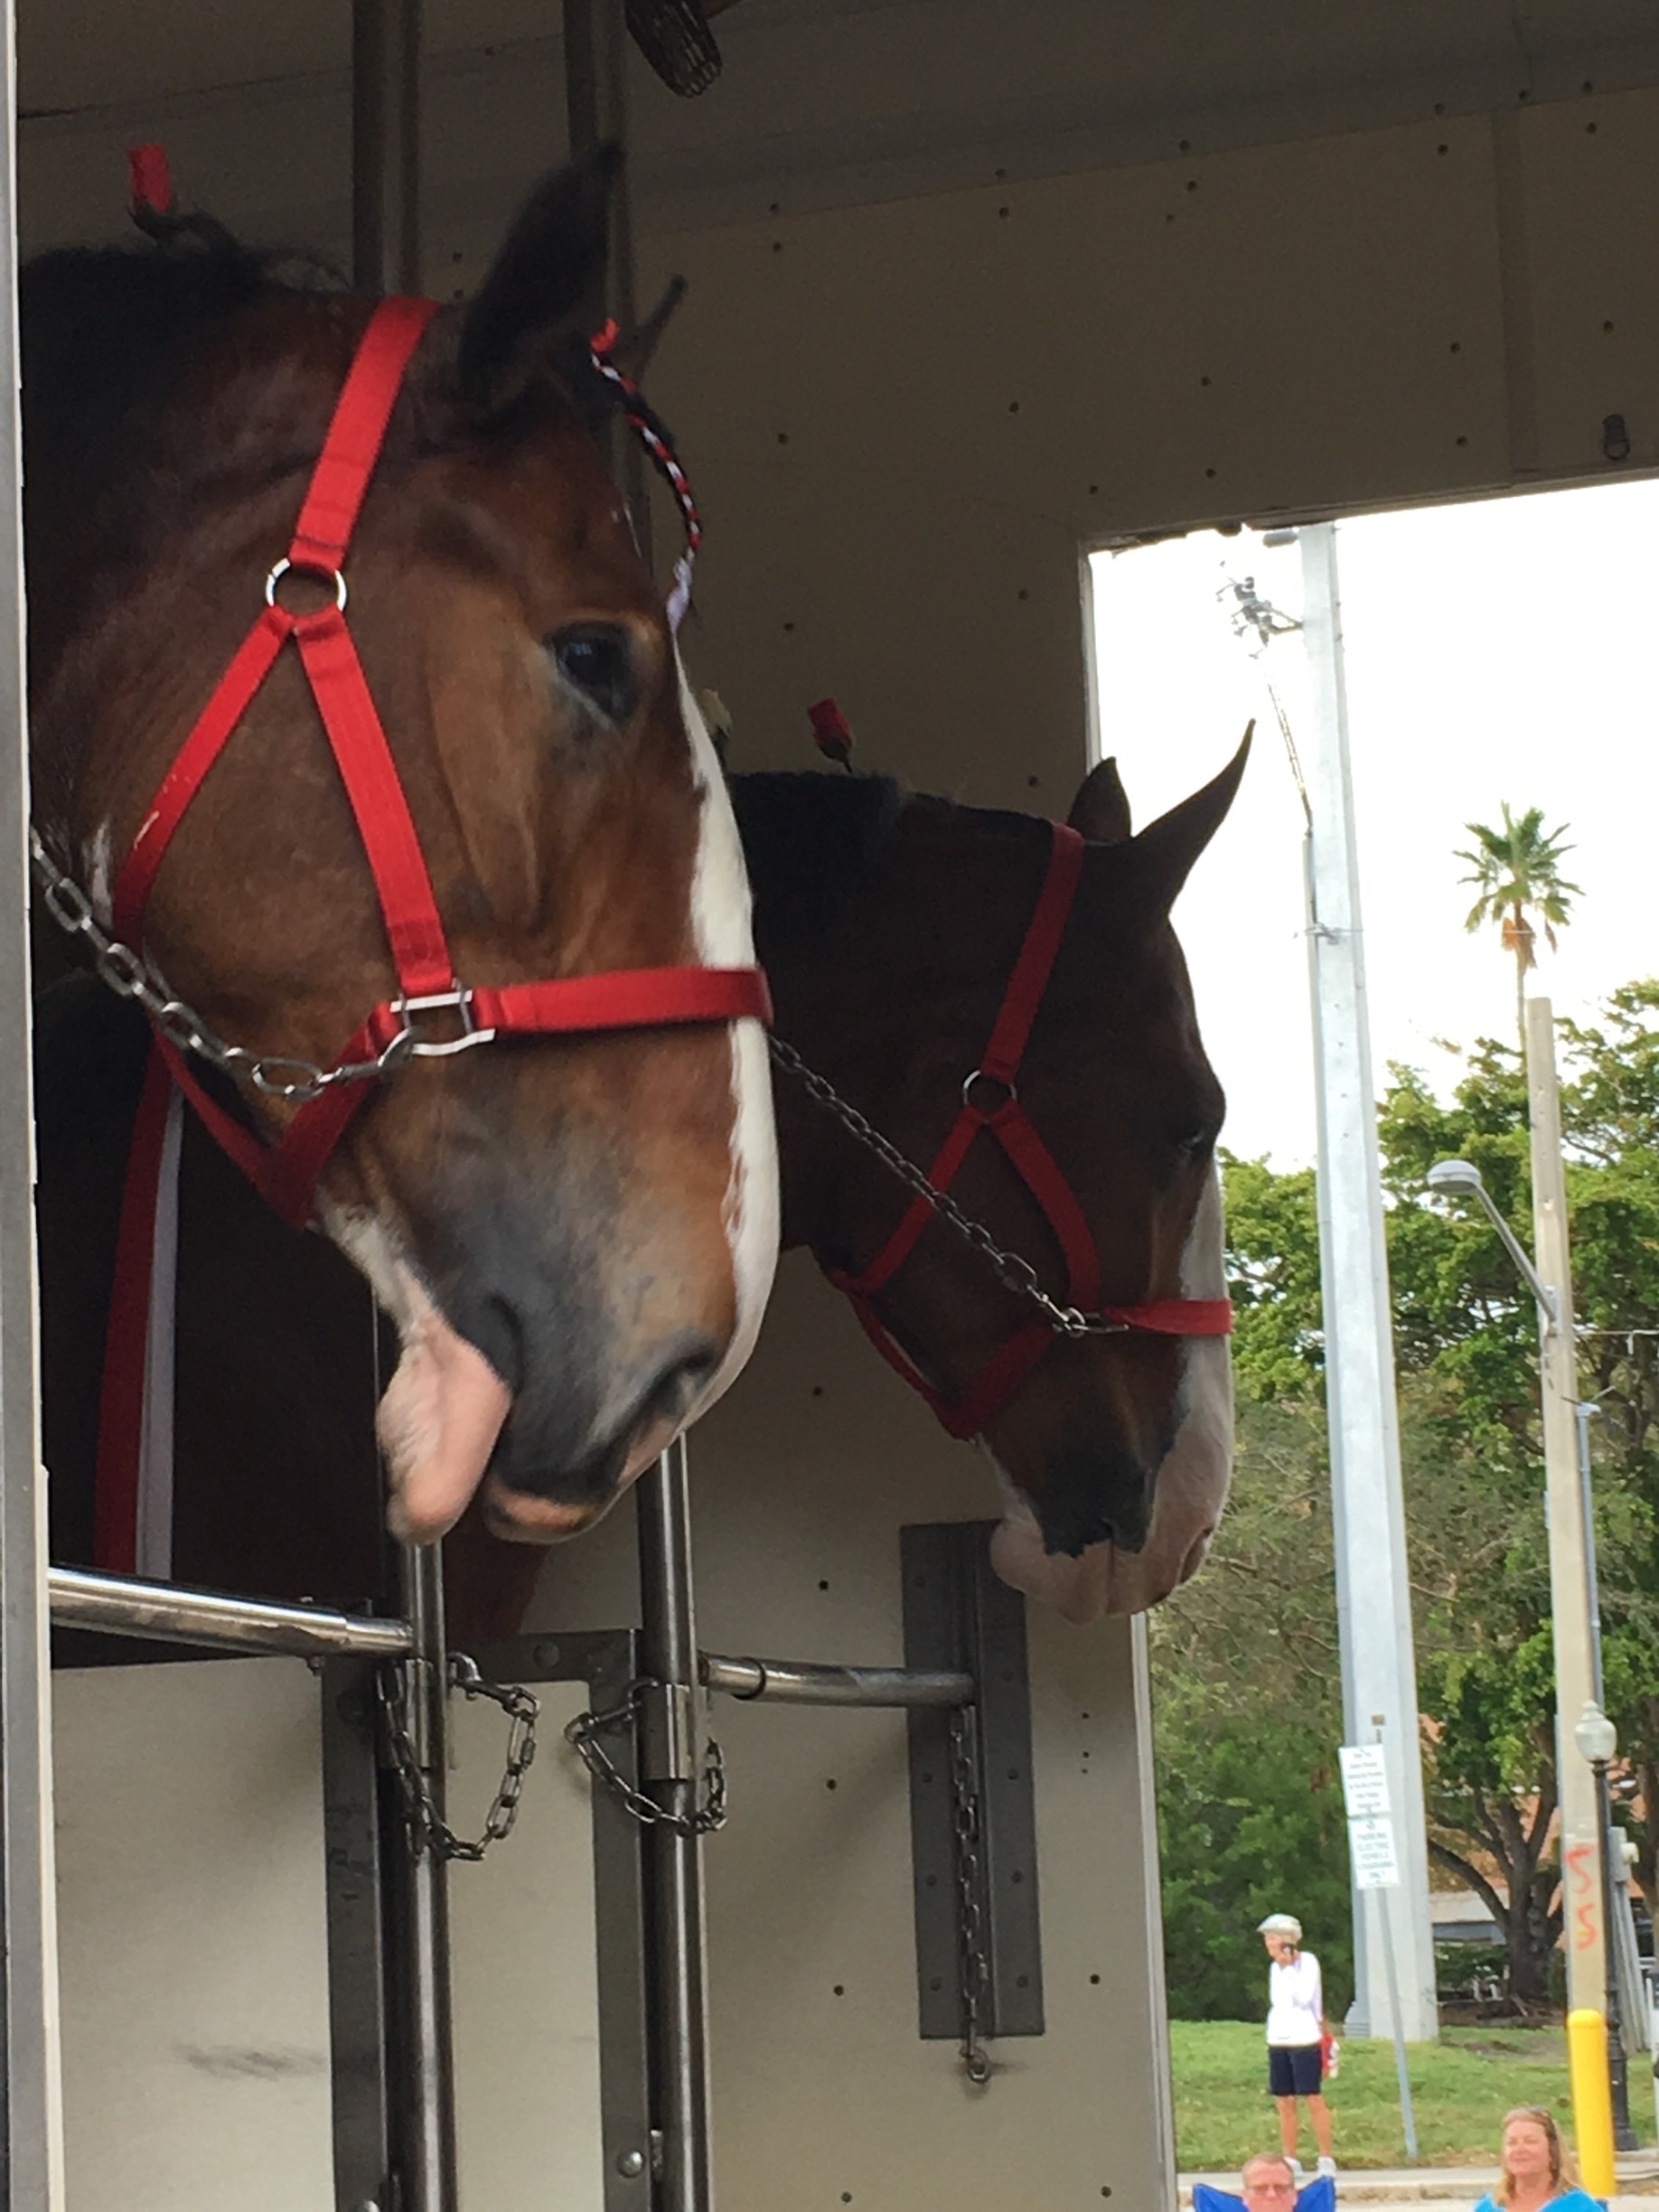 Budweiser Clydesdales arrived in Venice for the evening. The rain passed through before they arrived and there was great audience participation as they were traveling on Venice and Miami Avenues.